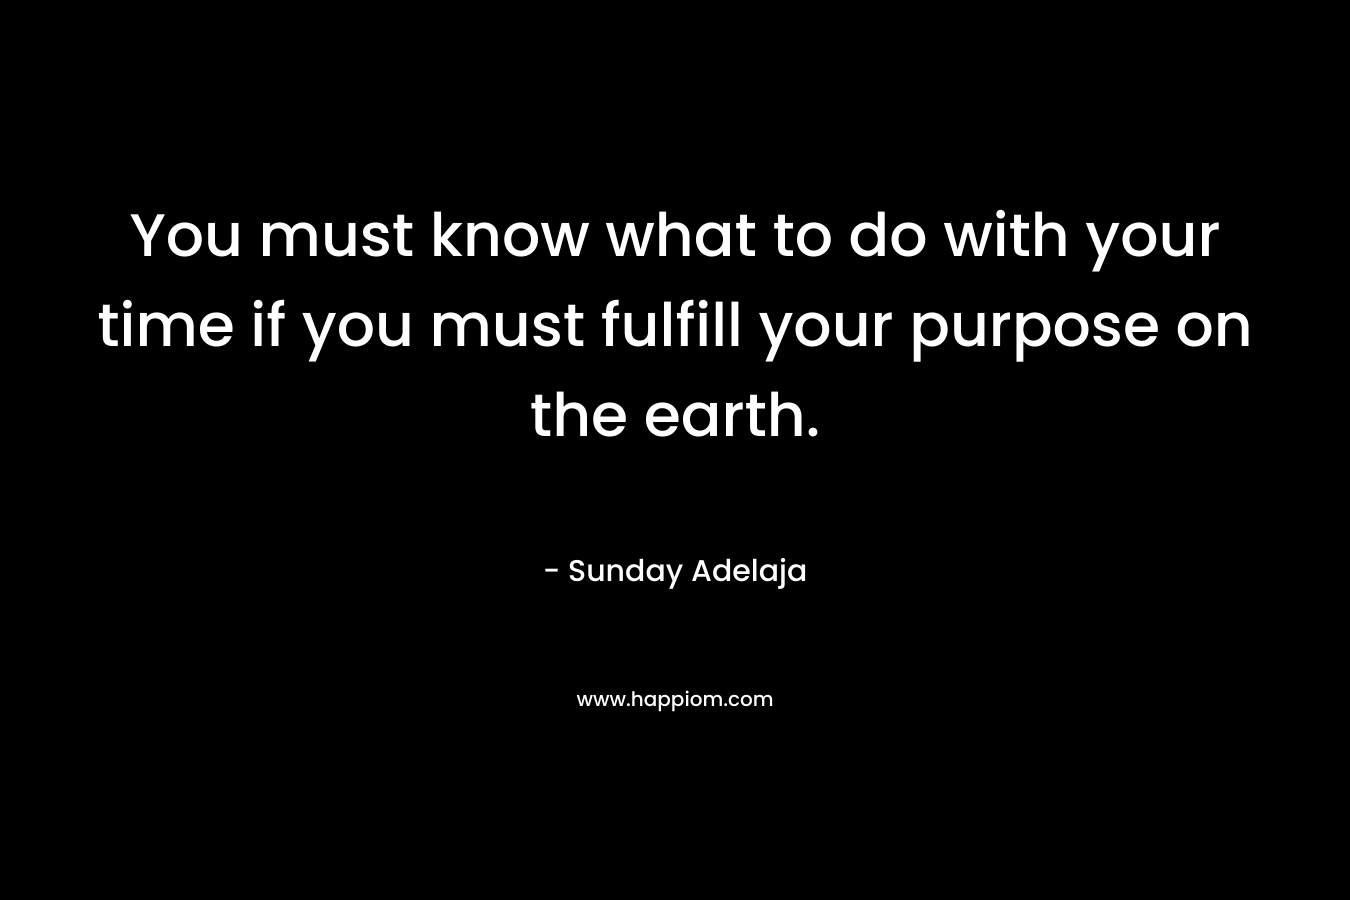 You must know what to do with your time if you must fulfill your purpose on the earth.